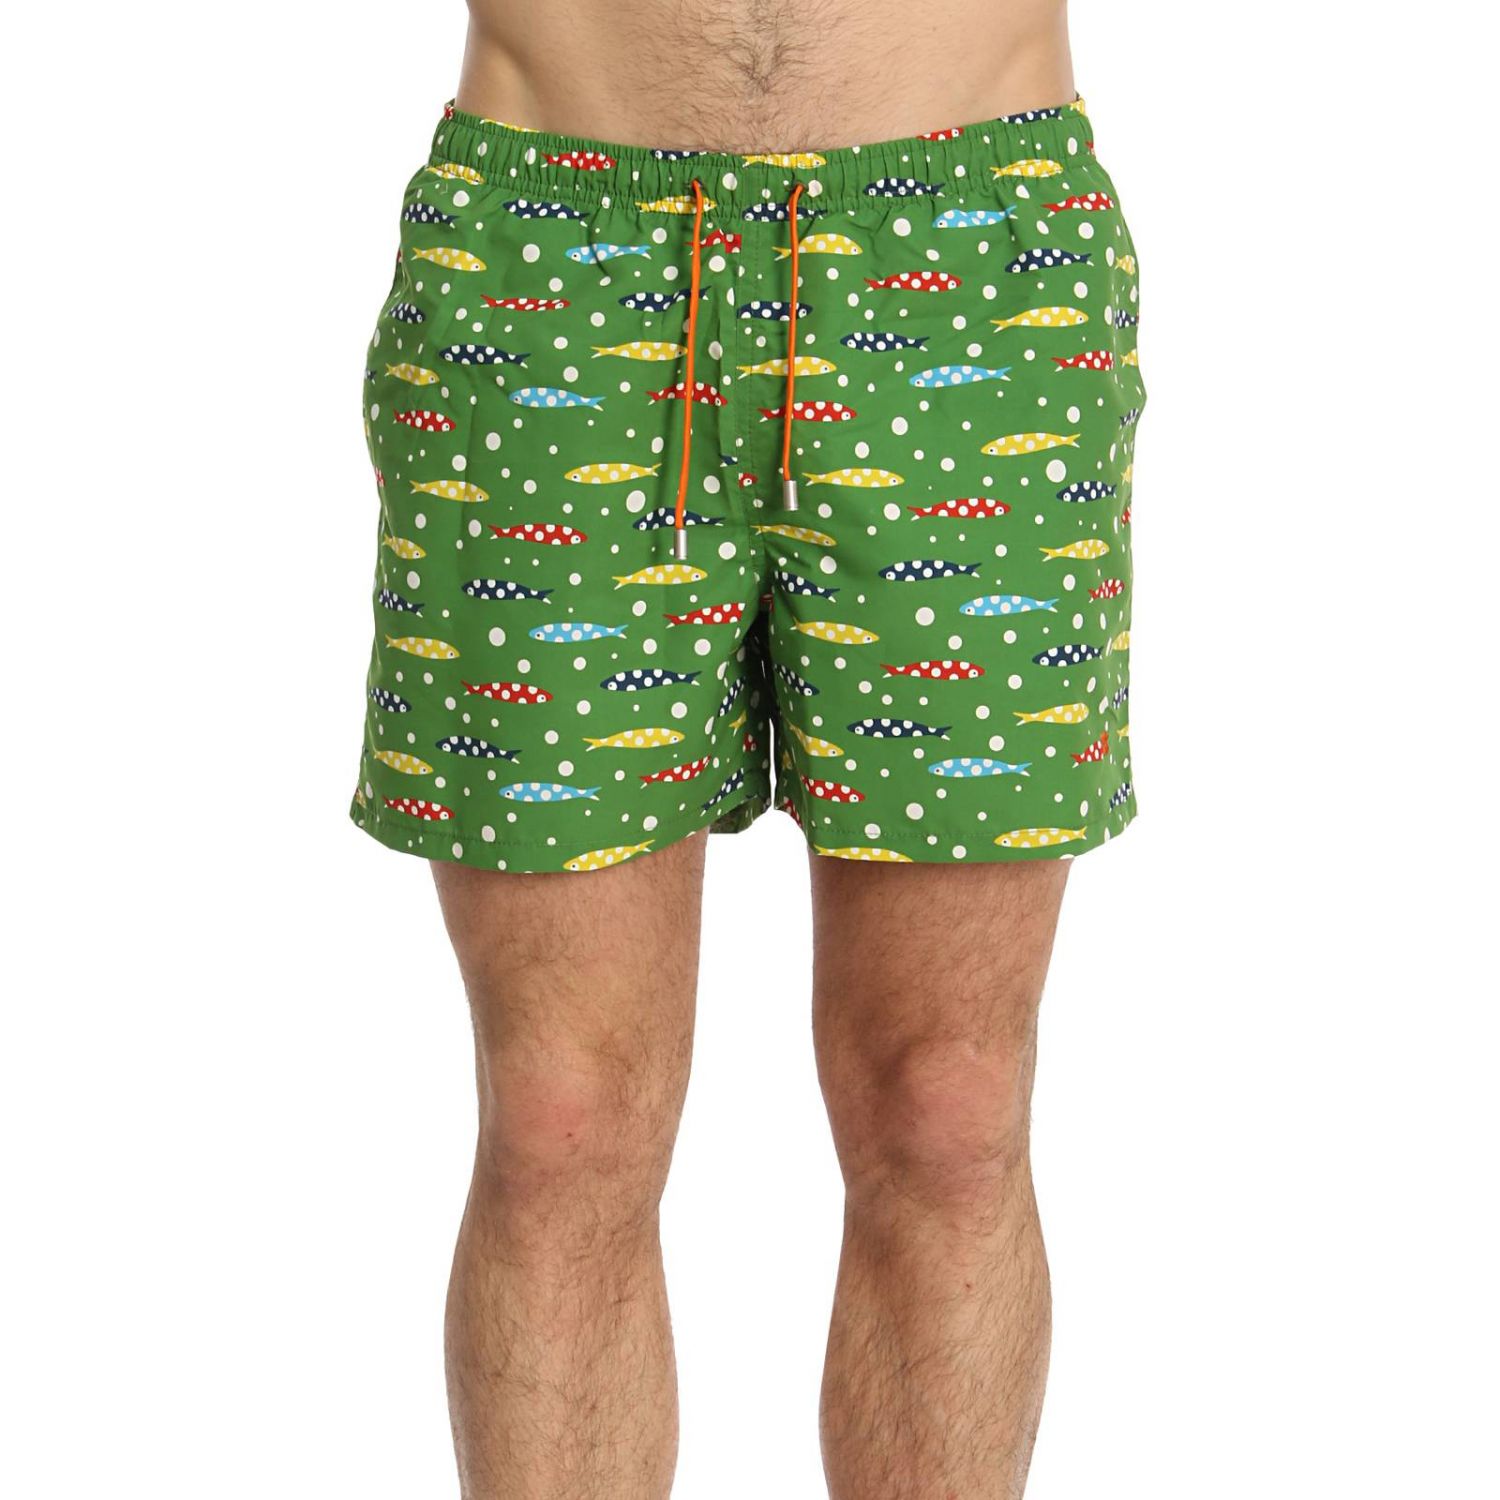 Gallo Outlet: Swimsuit men - Green | Swimsuit Gallo AP505281 GIGLIO.COM